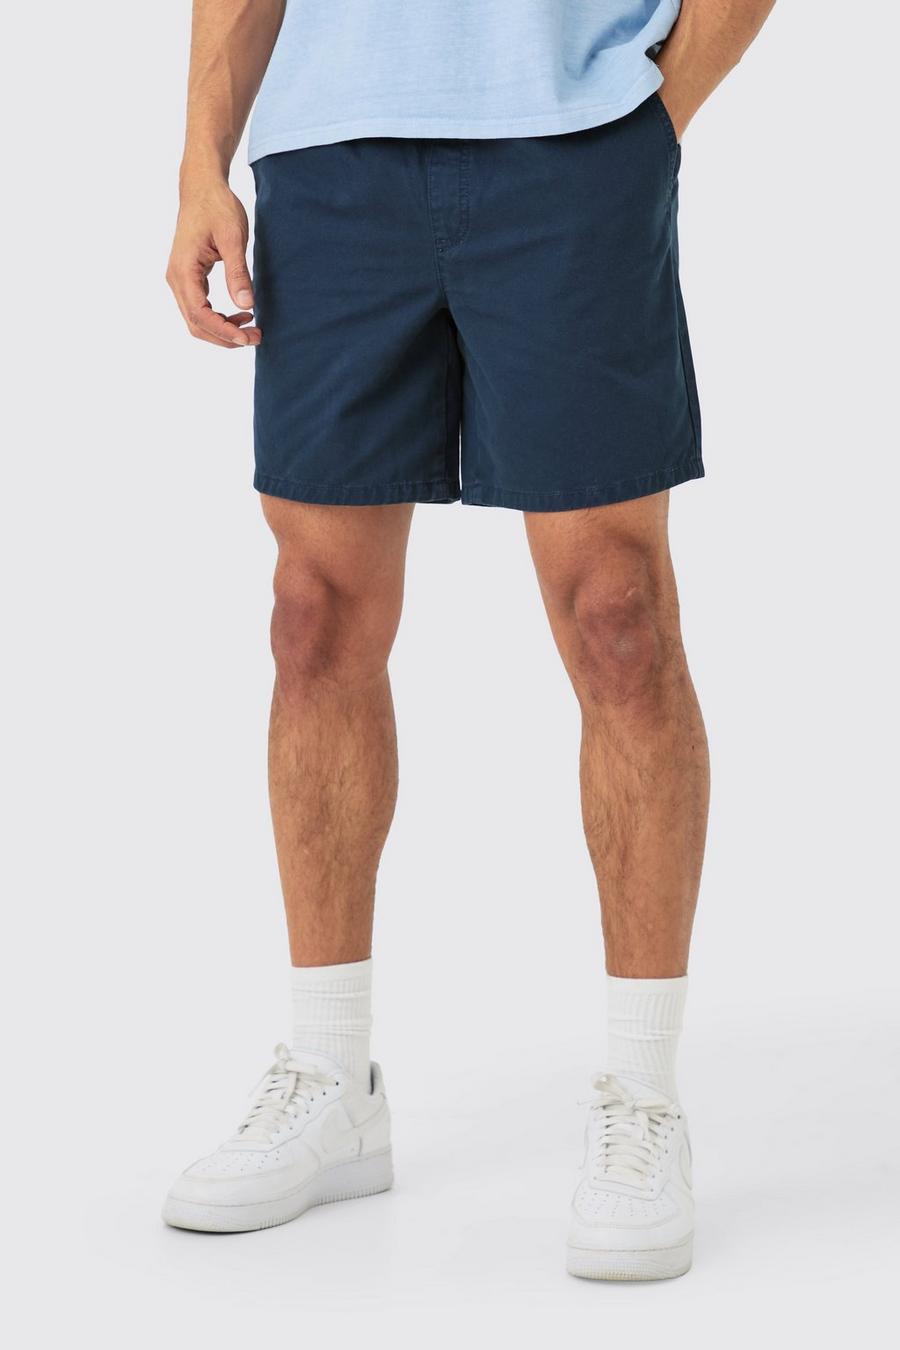 Shorter Length Relaxed Fit Elasticated Waist Chino Shorts in Navy